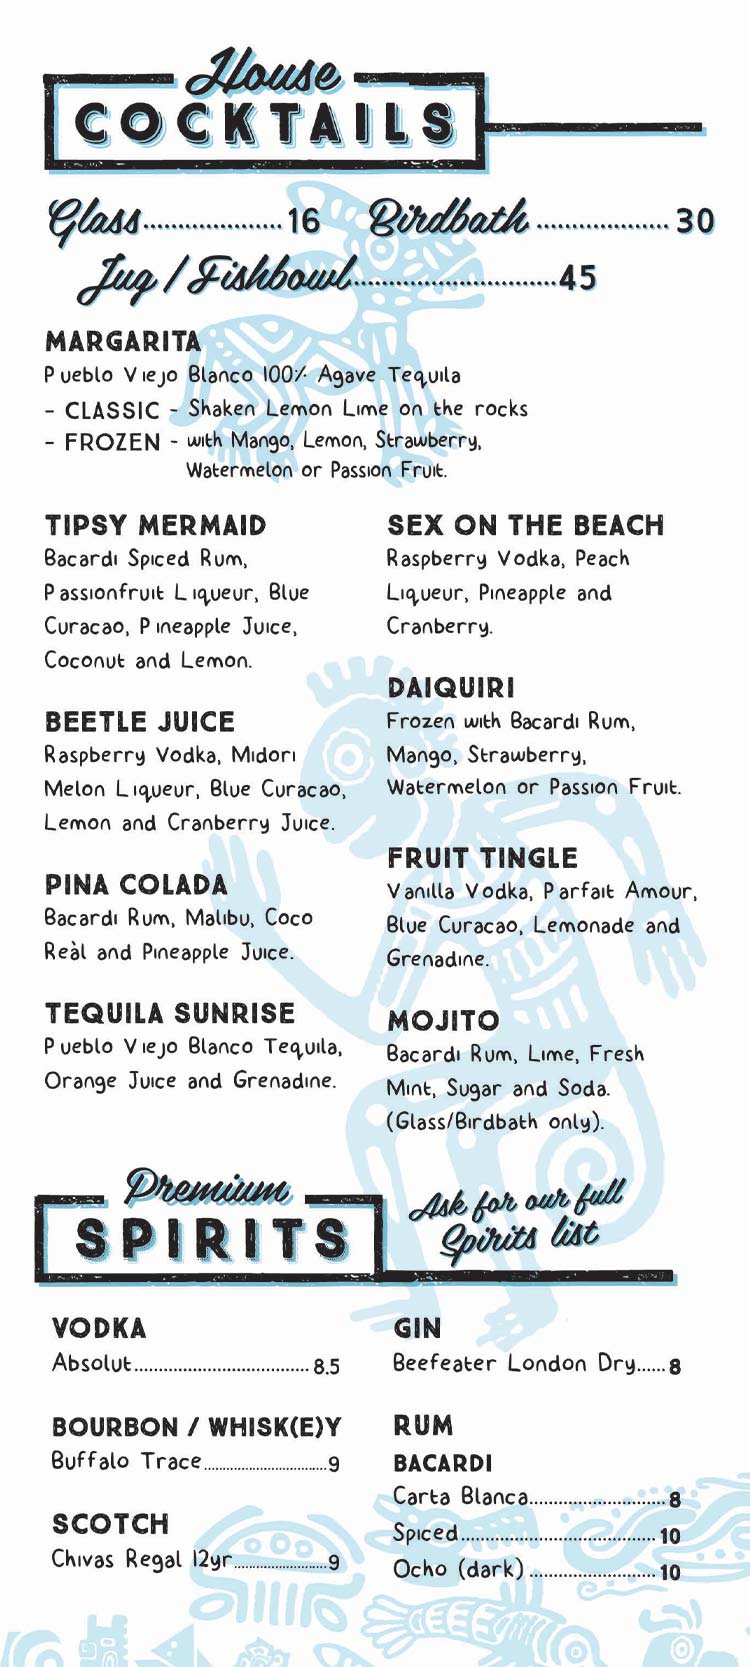 Drinks Menu at Mexican Kitchen - Cocktails and Sangria